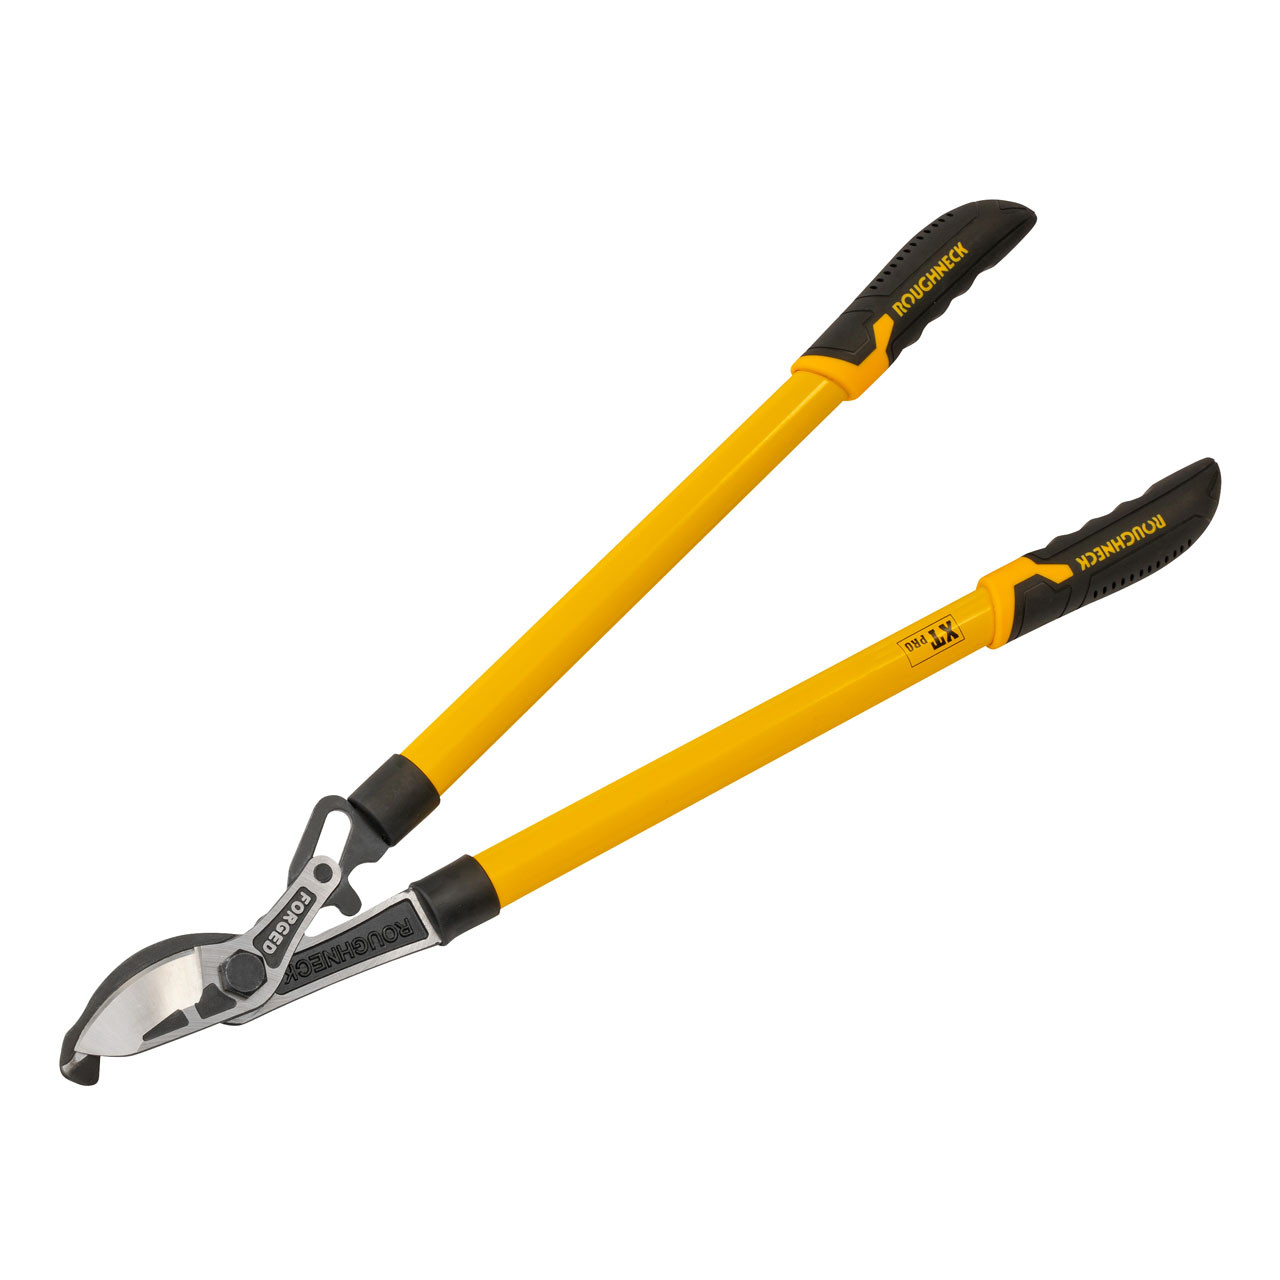 Photograph of Roughneck XT Pro Bypass Loppers